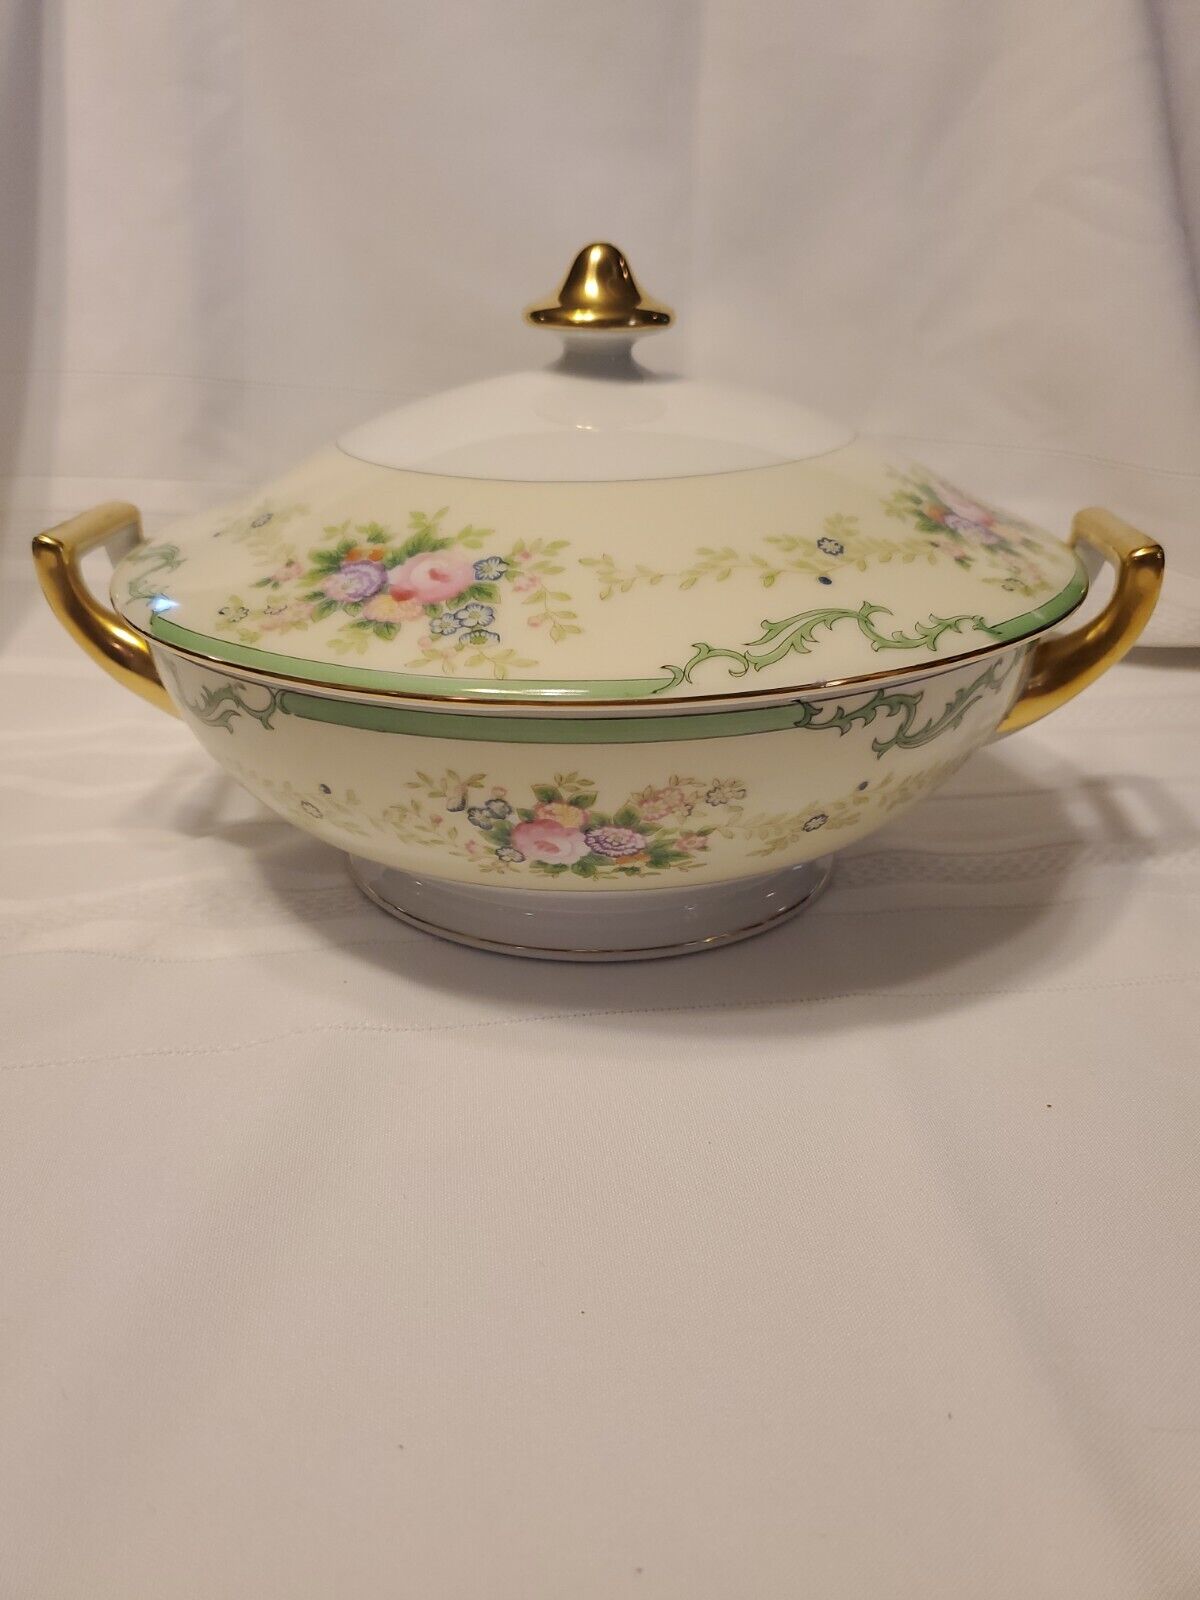 Meito China Dalton Covered Soup Vegetable Serving Bowl Retired Fine China 1940's